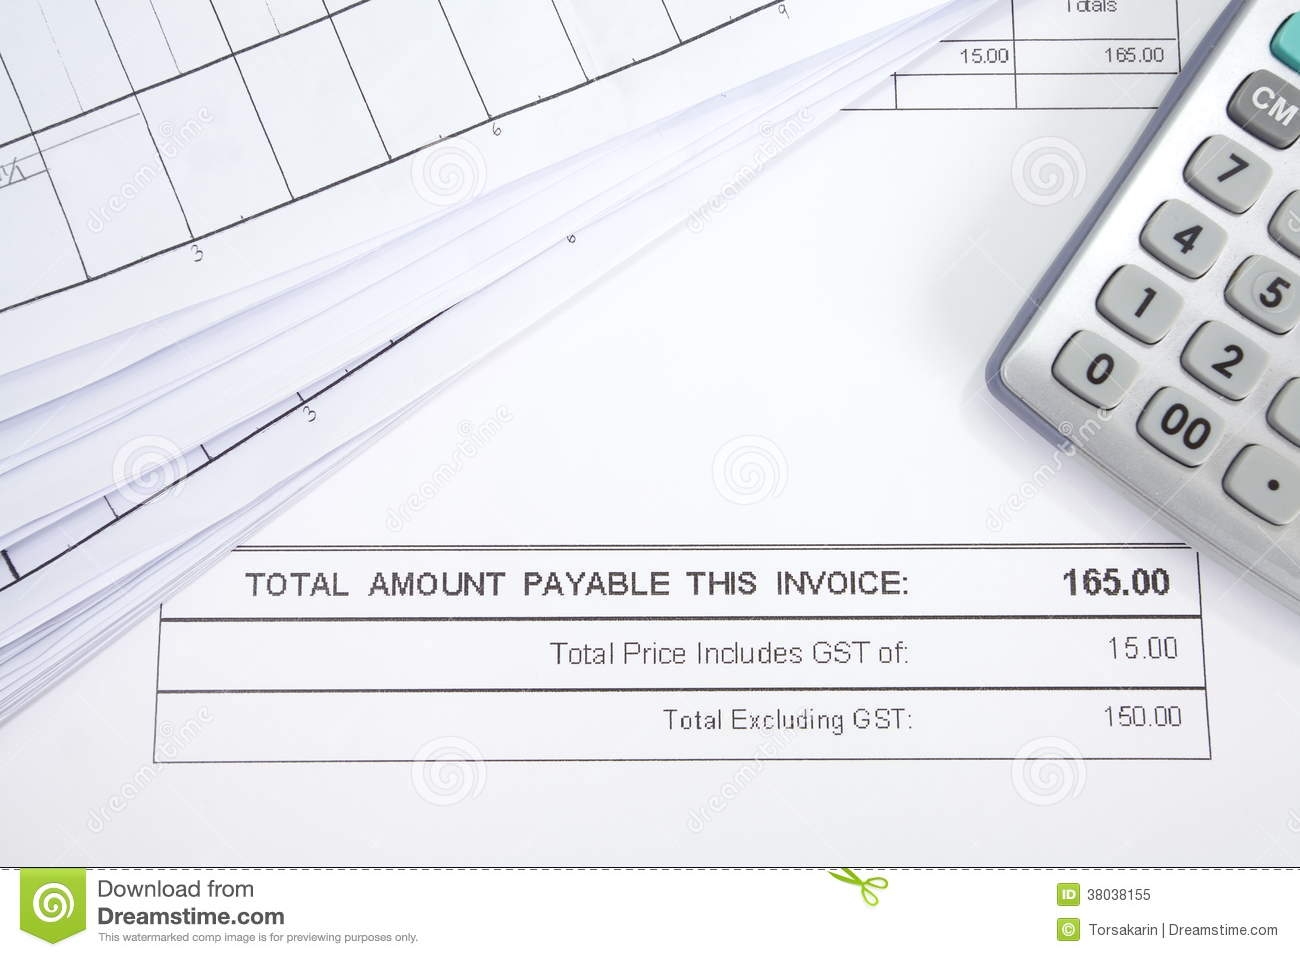 Royalty Gst Tax Invoice